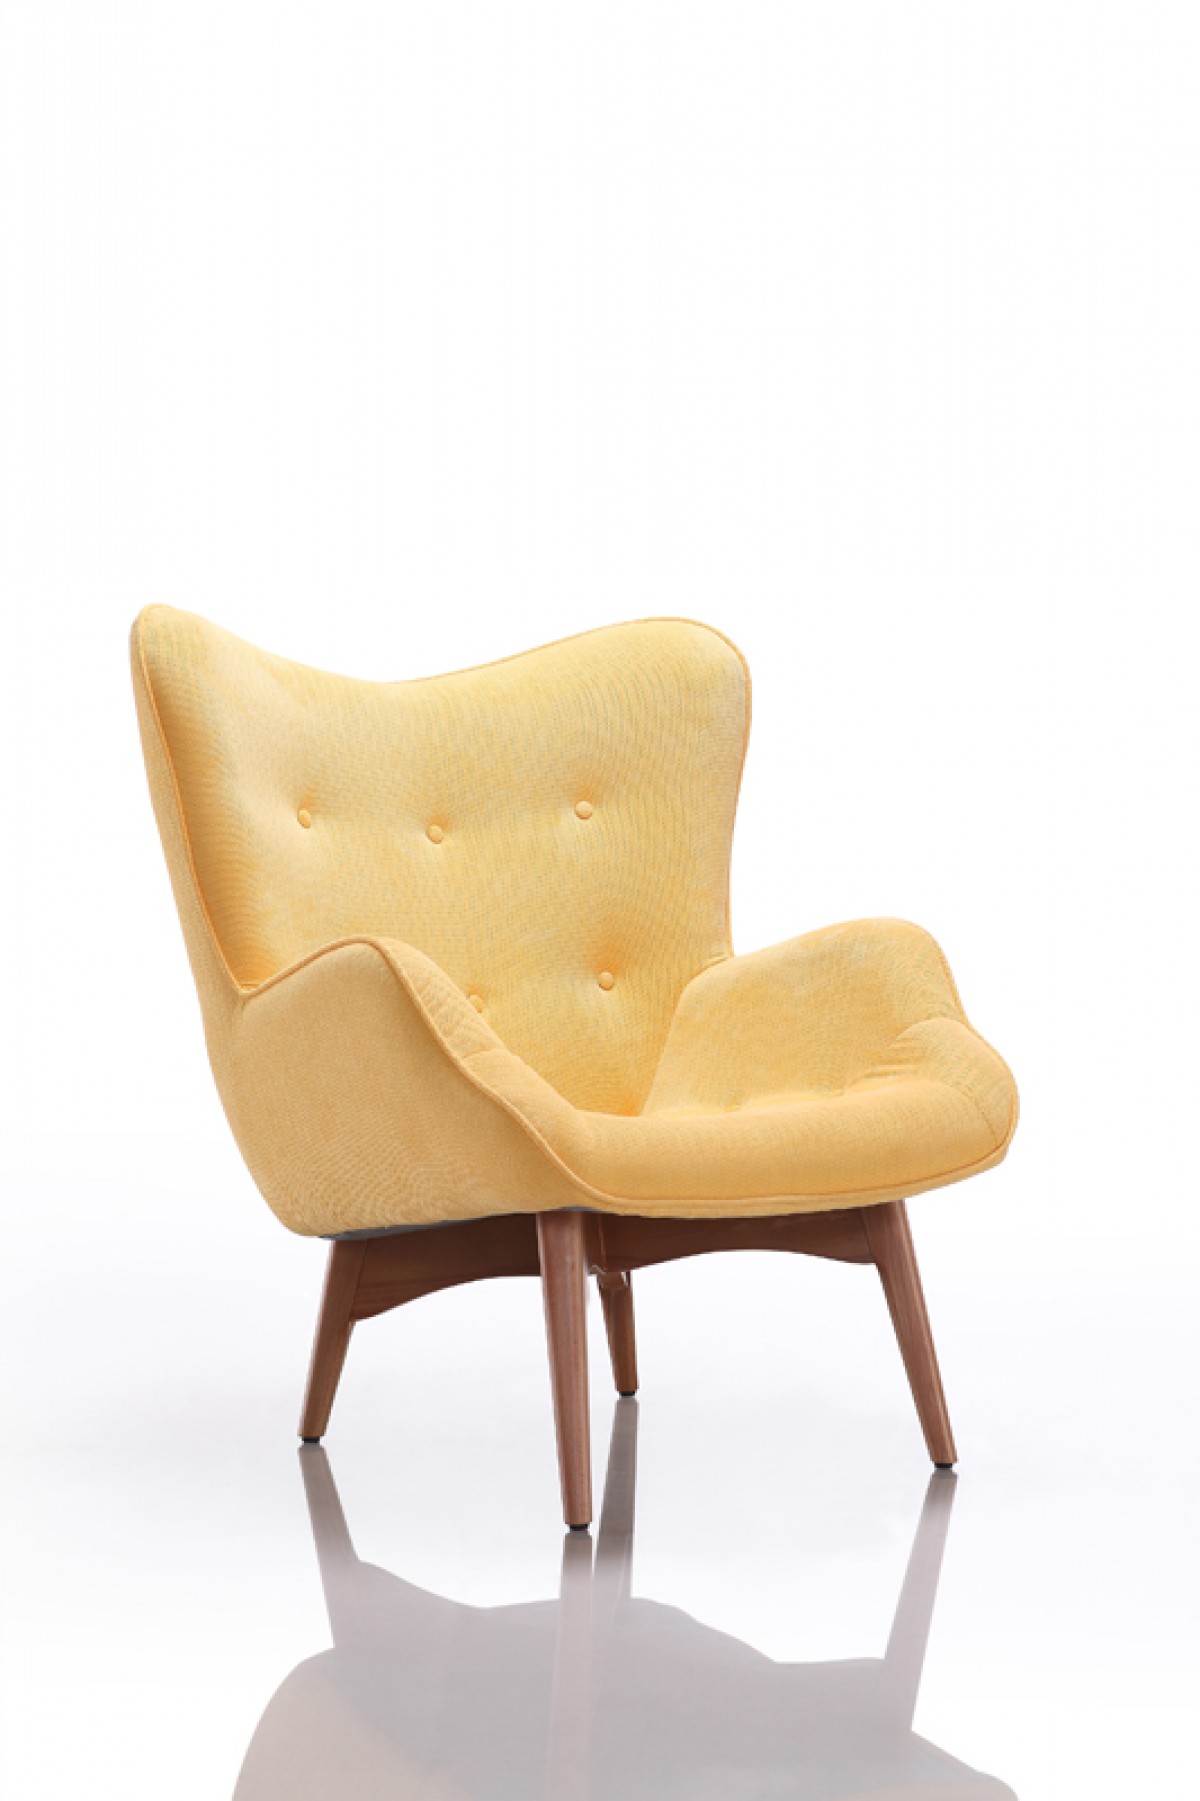 Cozy Yellow Fabric Chair with Ottoman - Click Image to Close